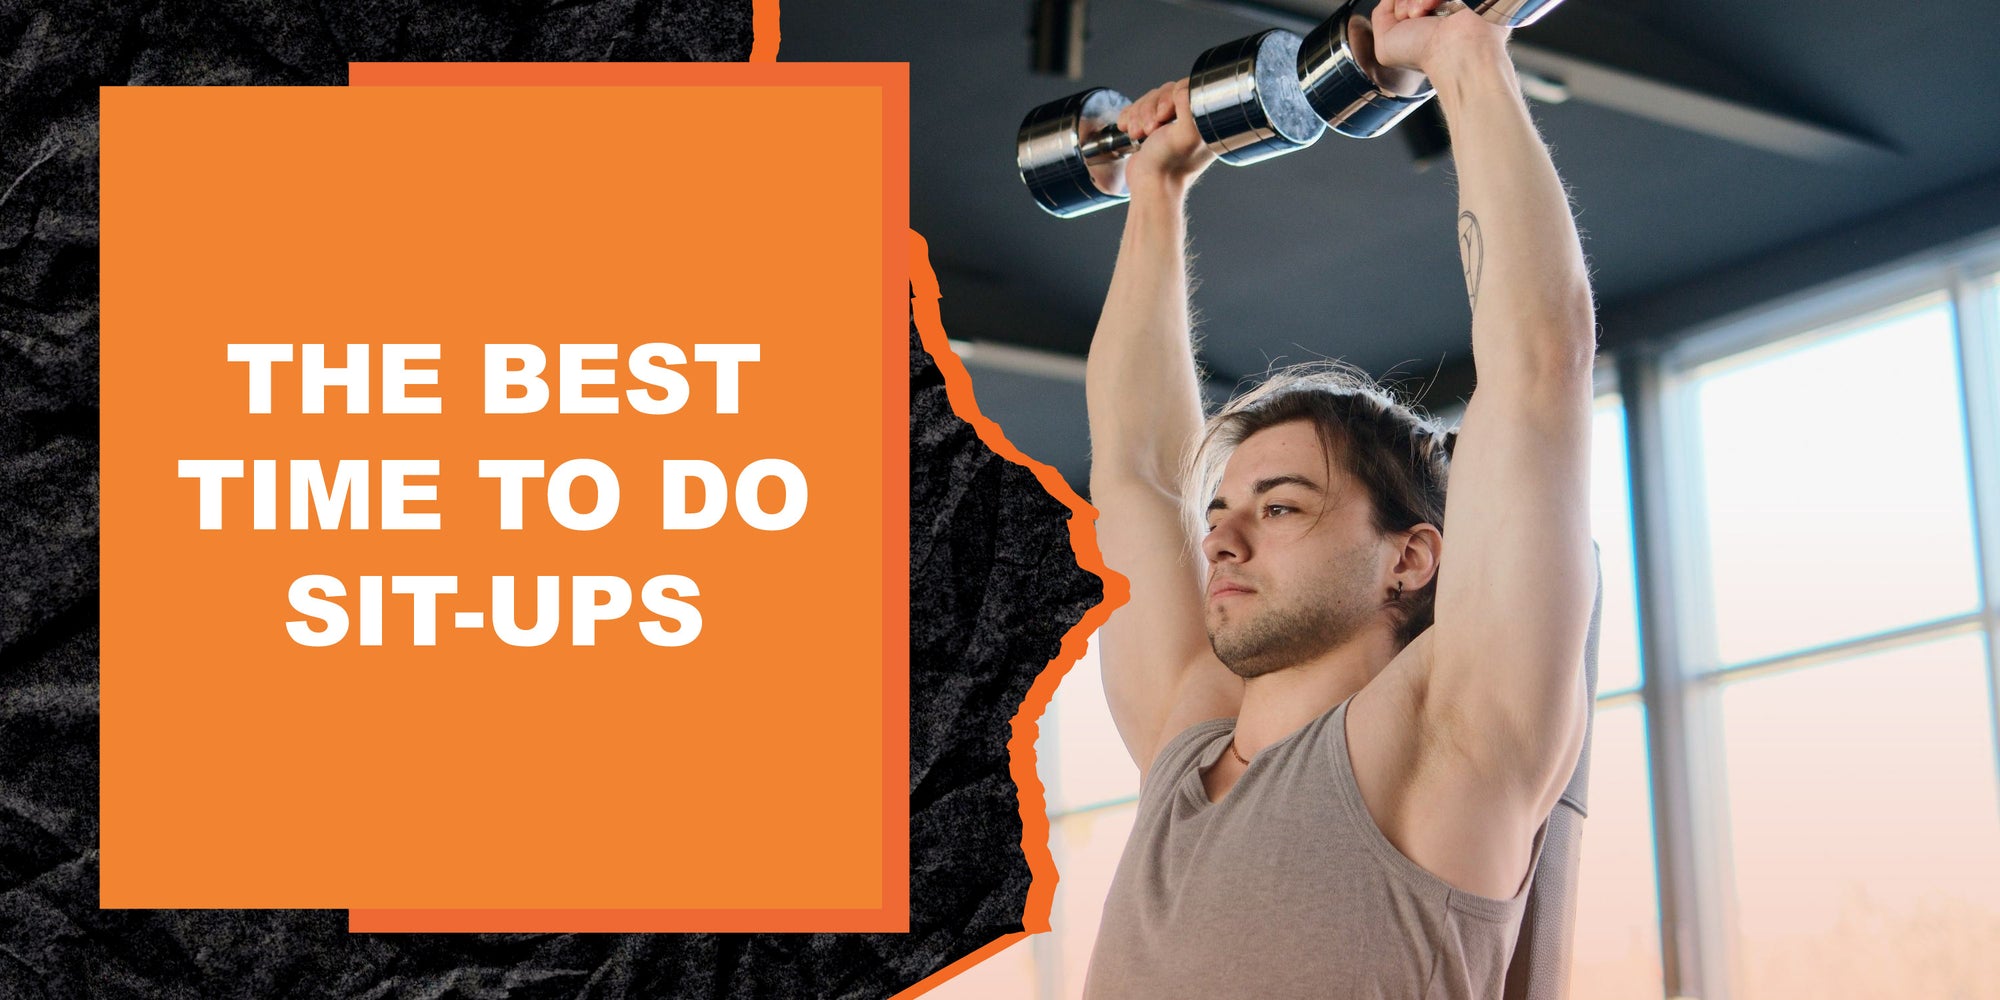 The Best Time to Do Sit-Ups